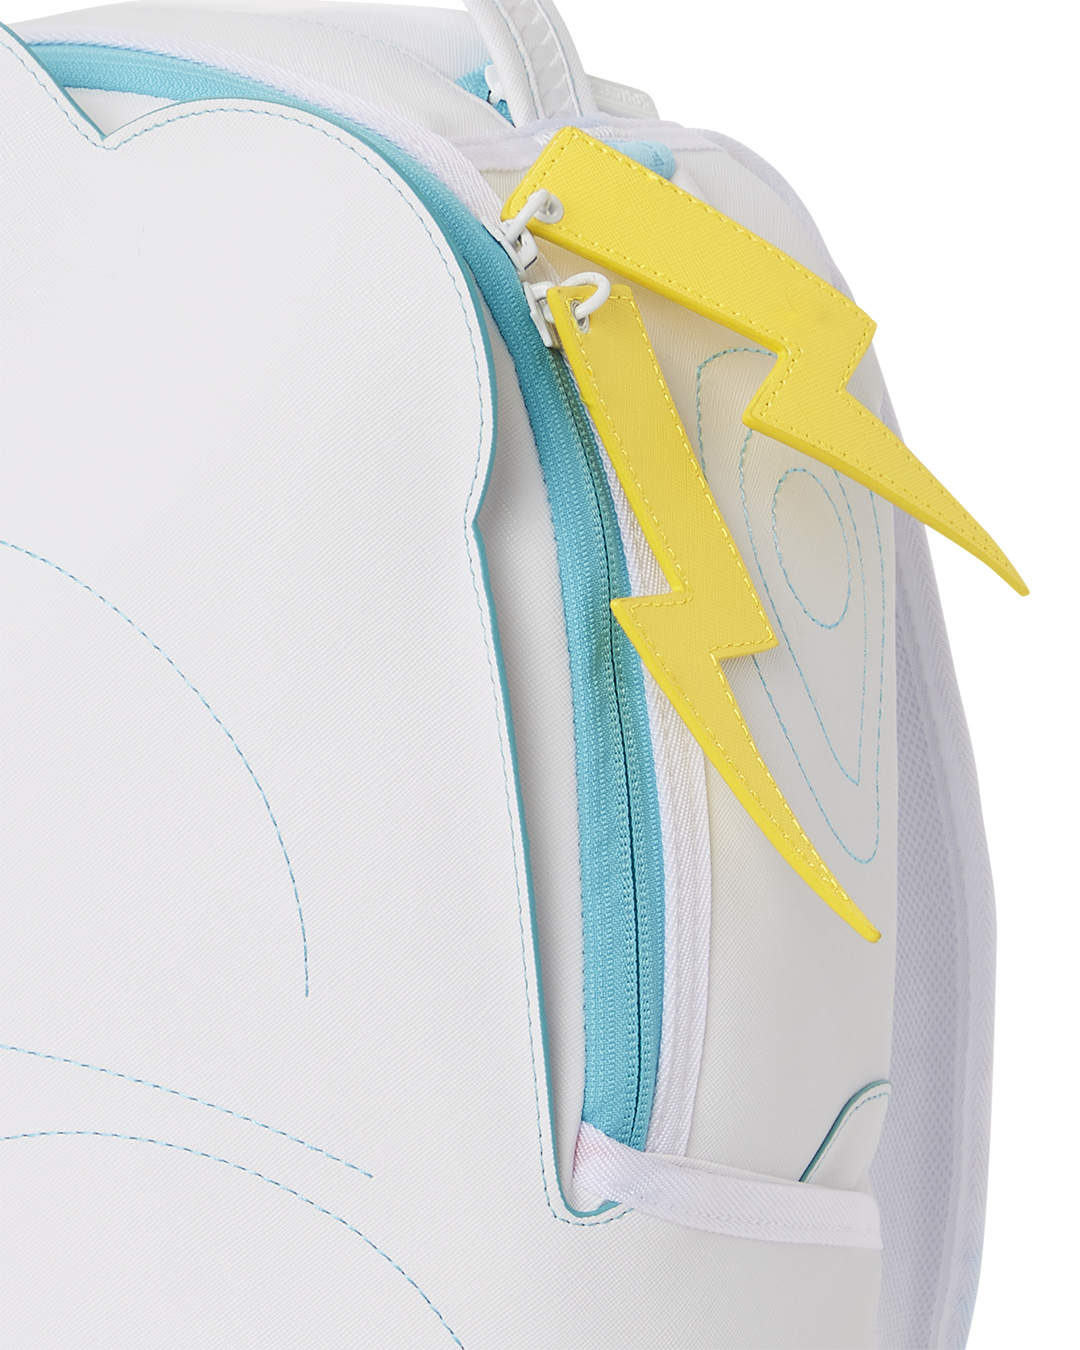 CLOUDY WITH A CHANCE OF SHARK BACKPACK (DLXV) – SPRAYGROUND®